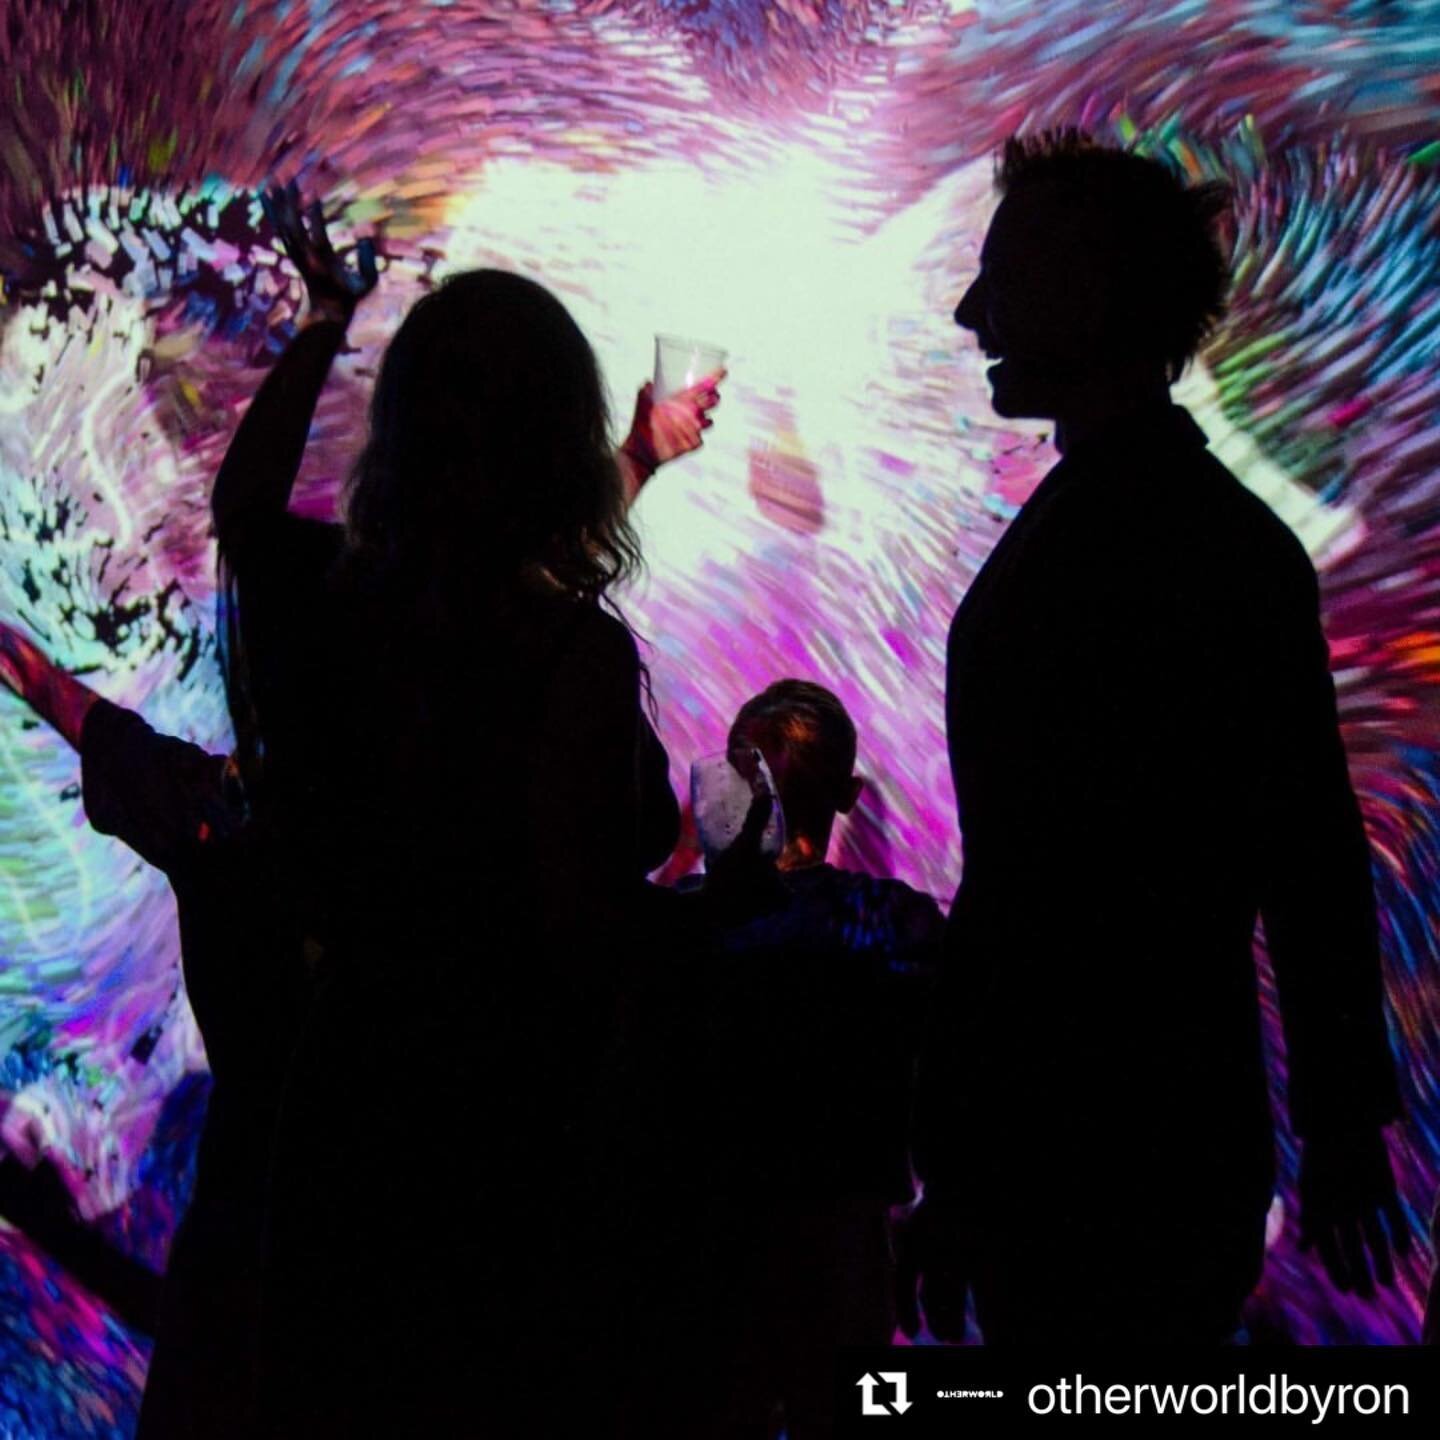 If you find yourself up in @byron.bay.nsw I&rsquo;ve got a couple of vibrant interactive works on exhibition at @otherworldbyron immersive art gallery! #interactiondesign #experiential #motiondesign #interactive #realtimevfx #digitalart #touchdesigne